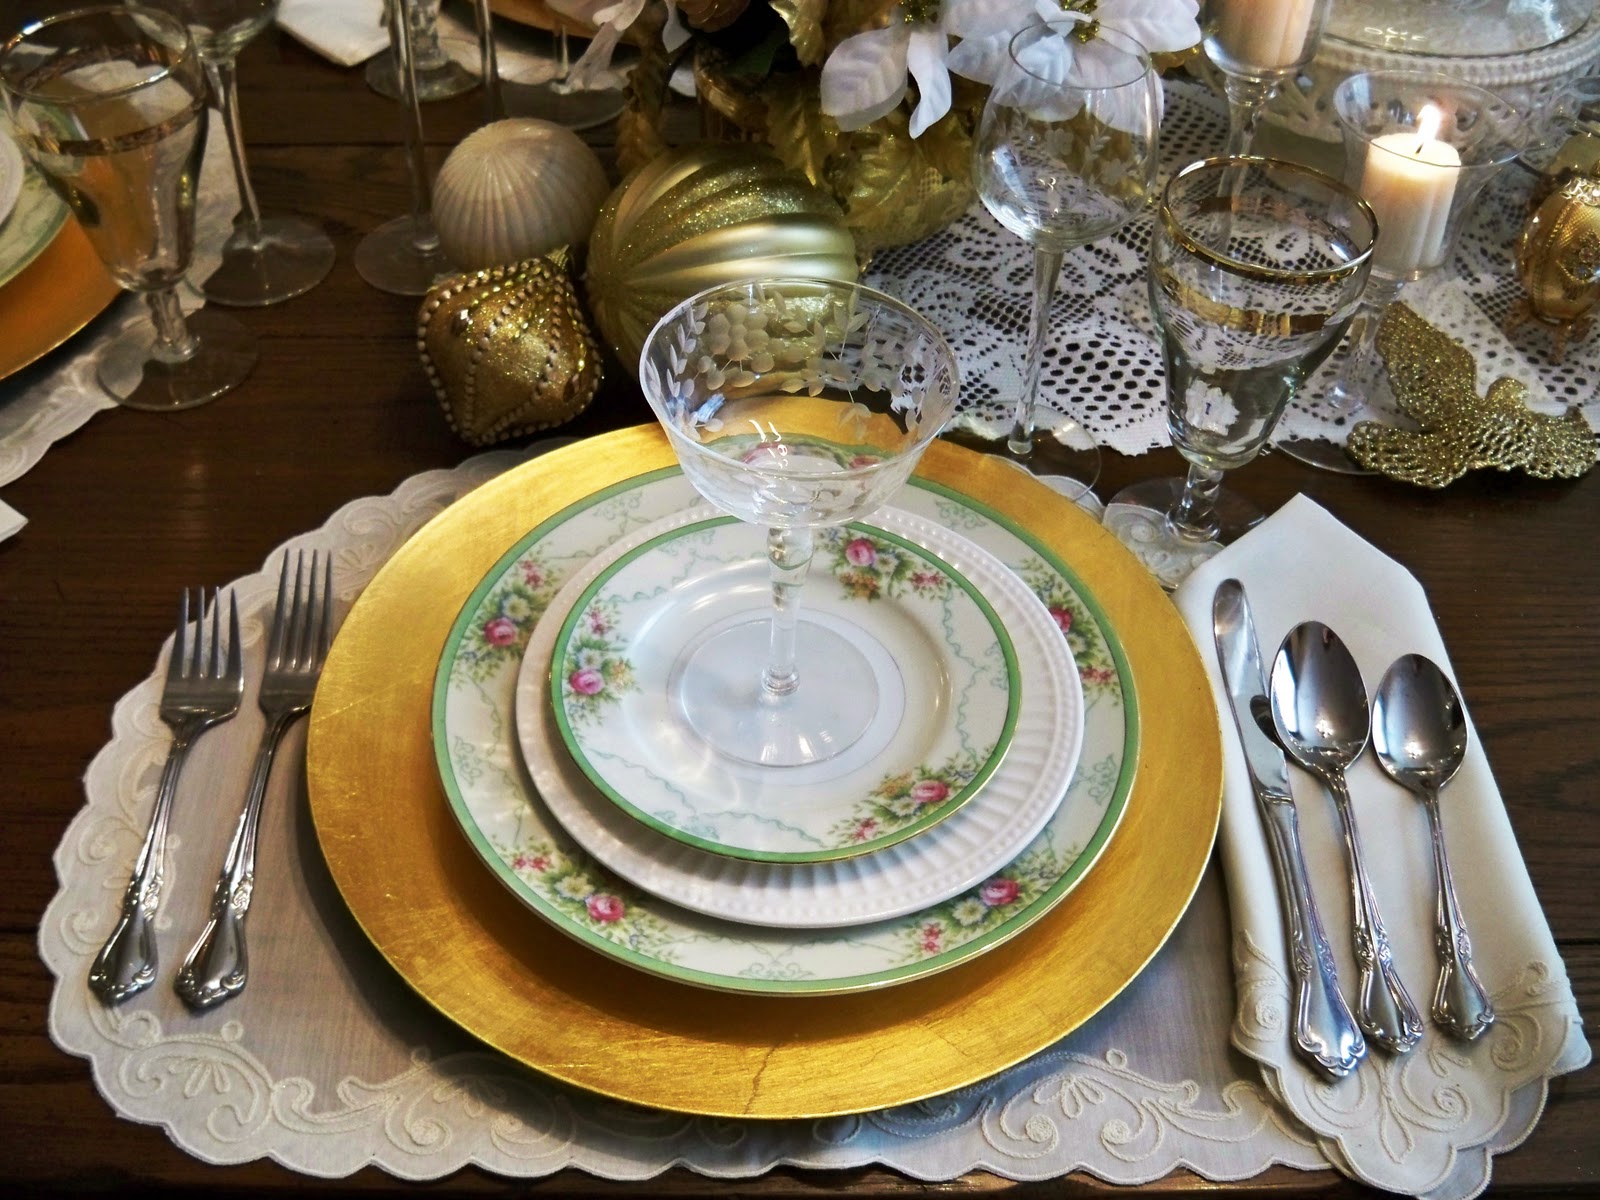 tablescape with goodwill, thrifty finds